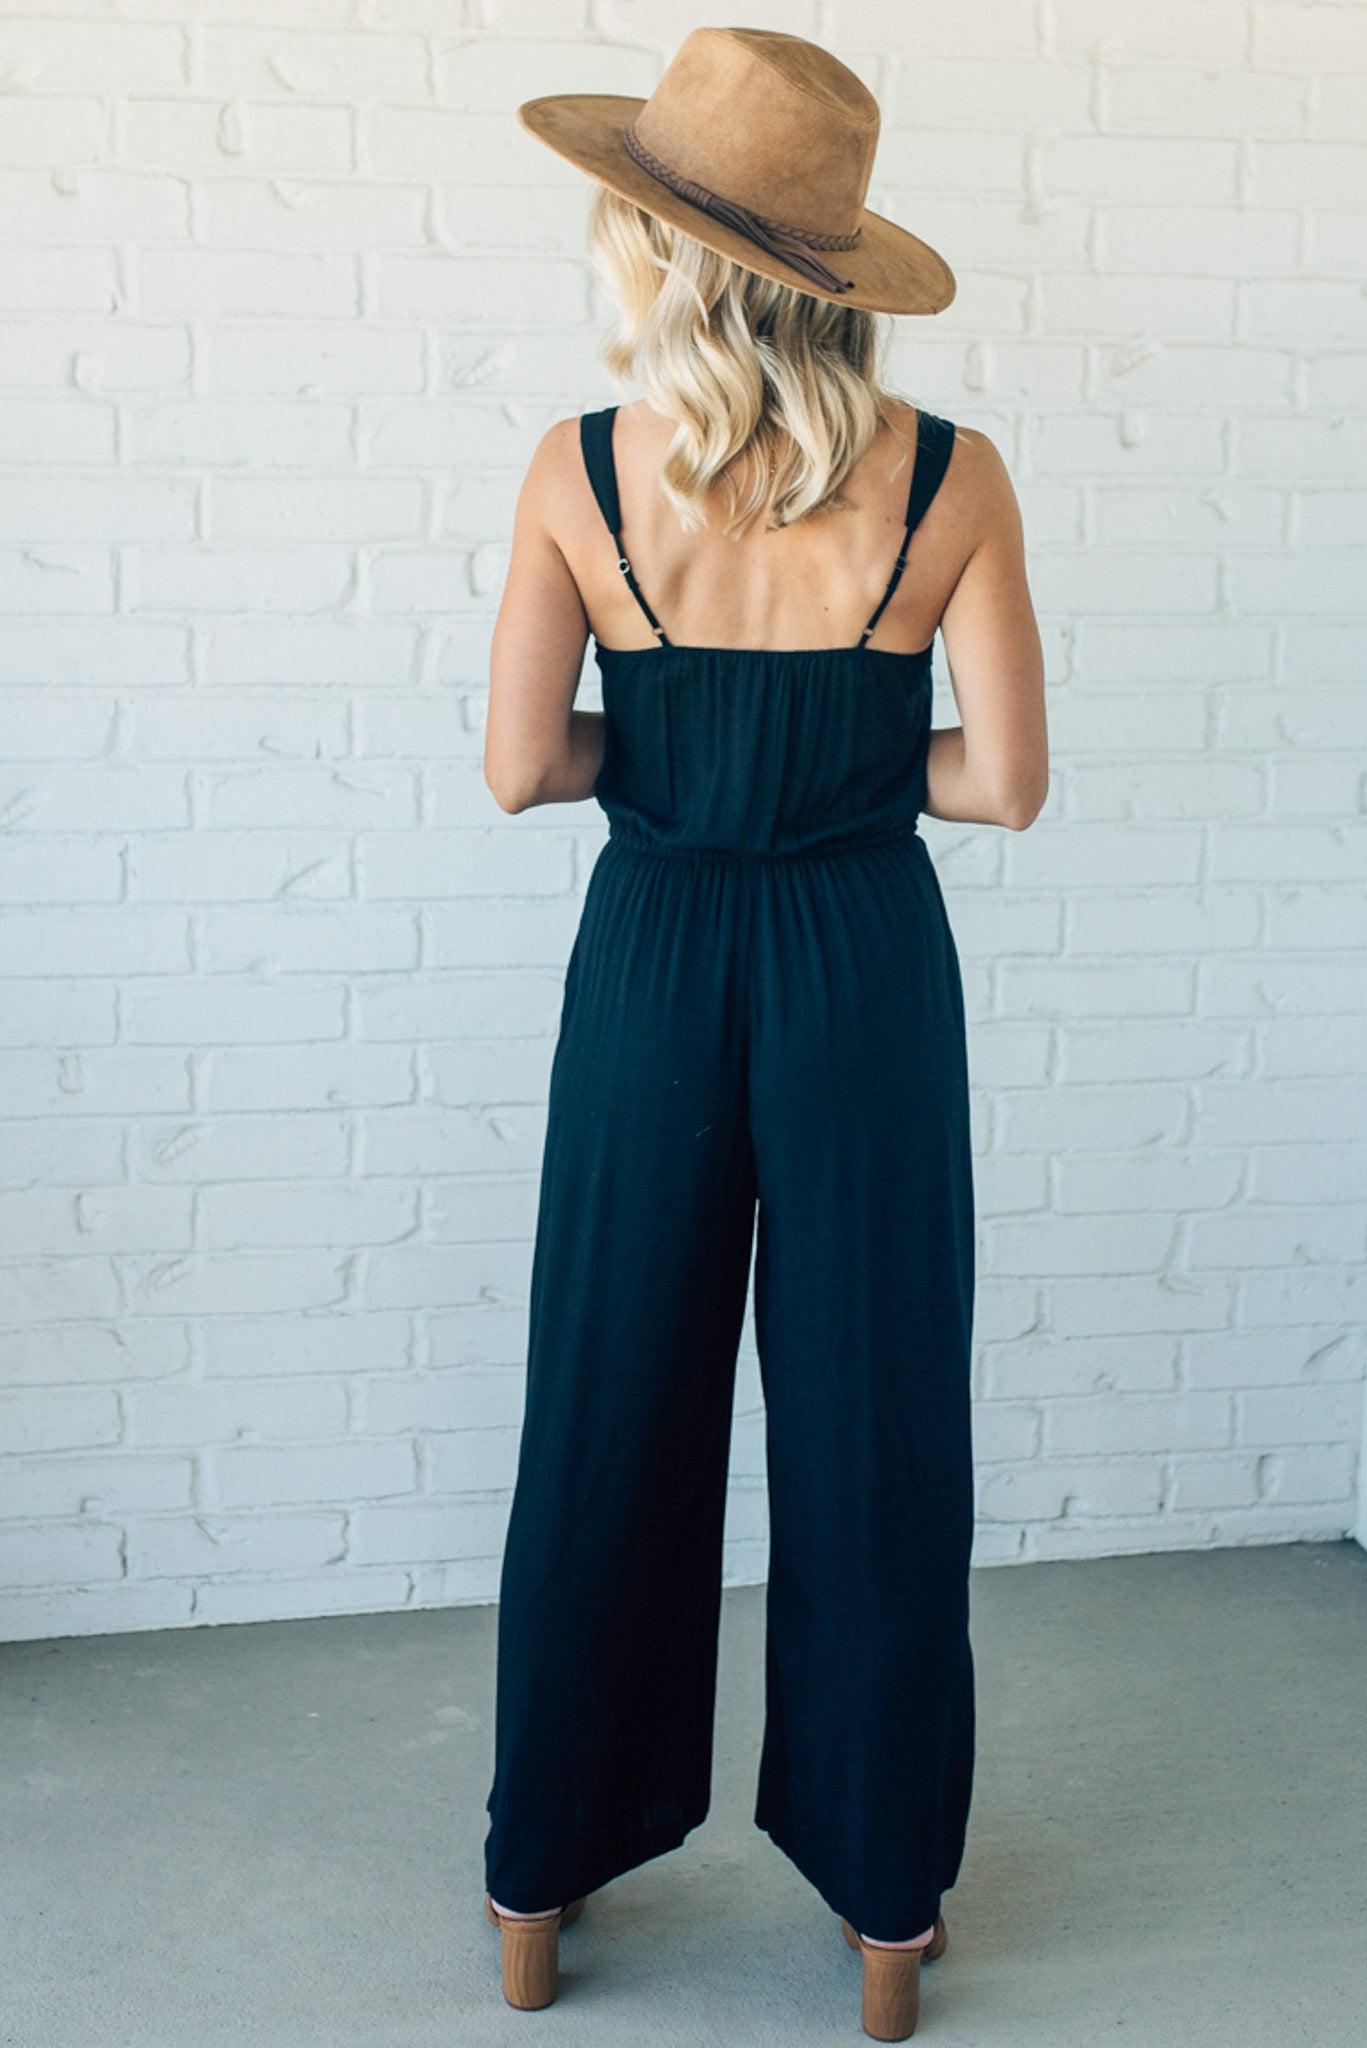 Women wearing a black wide leg jumpsuit with tie waist and pockets.